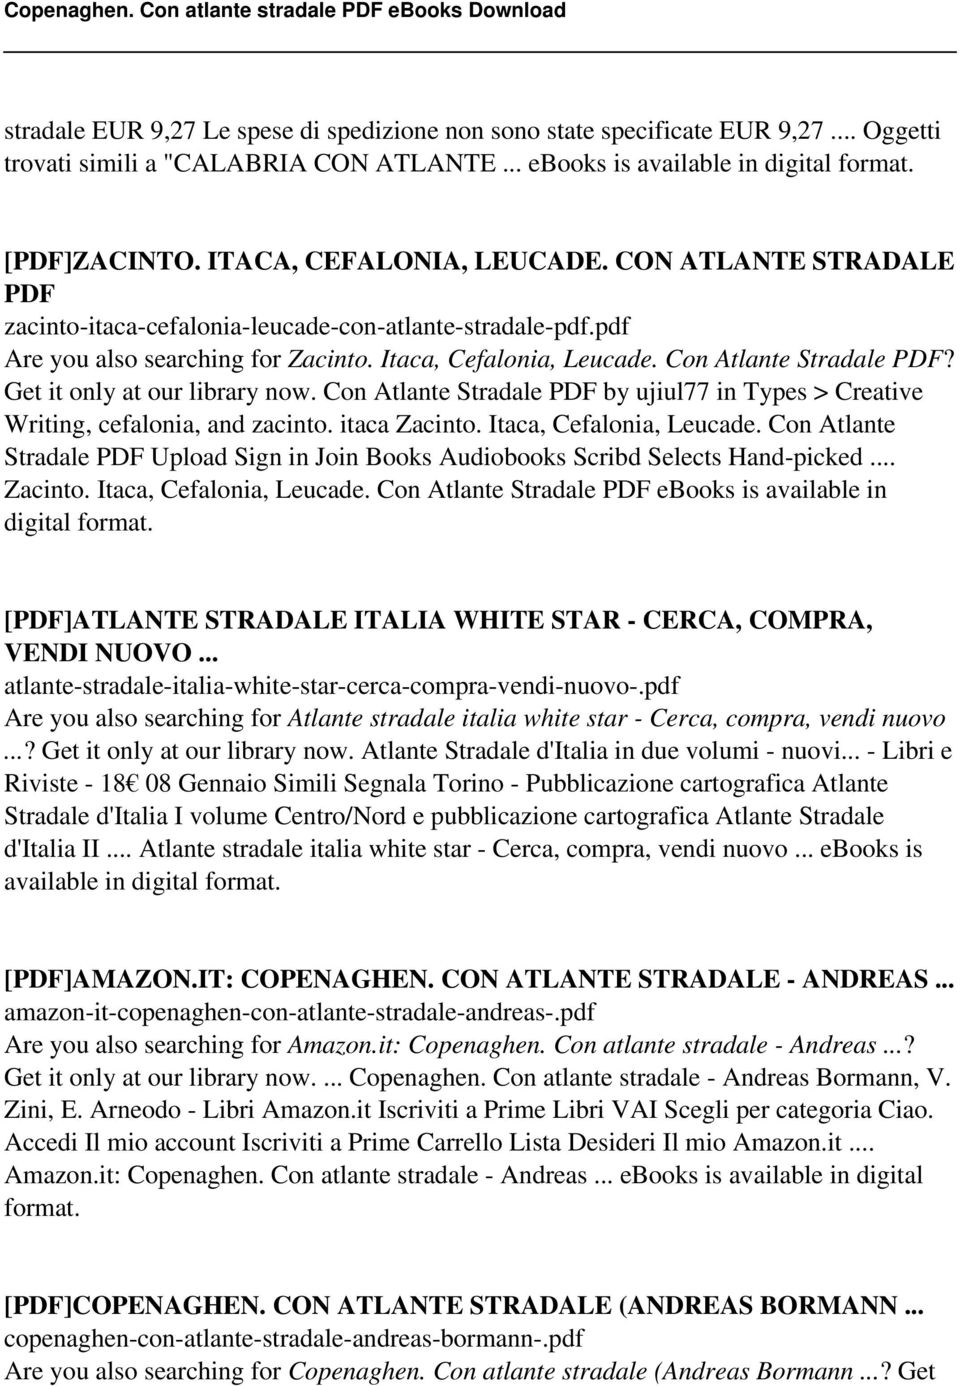 Get it only at our library now. Con Atlante Stradale PDF by ujiul77 in Types > Creative Writing, cefalonia, and zacinto. itaca Zacinto. Itaca, Cefalonia, Leucade.